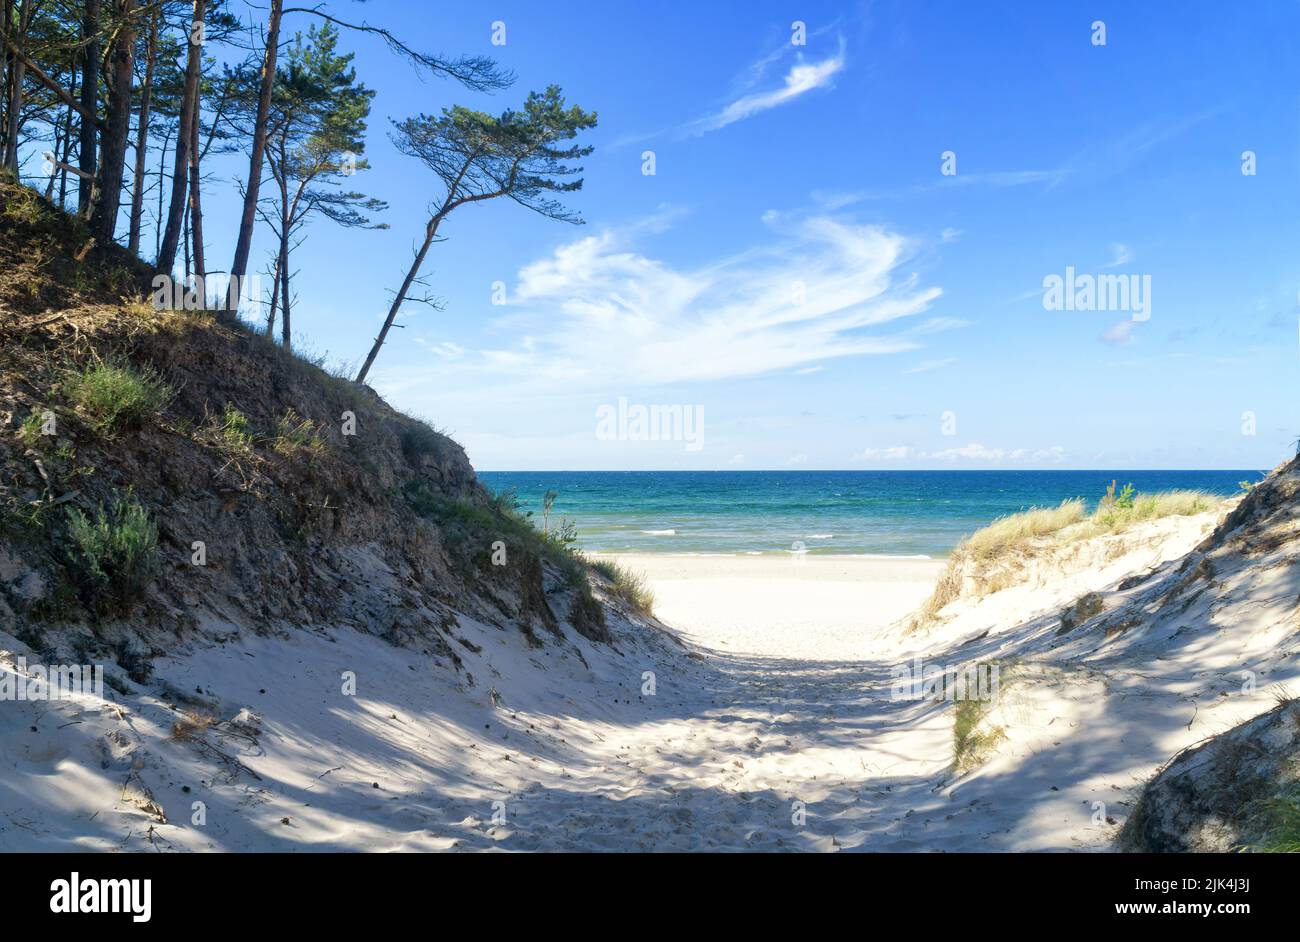 Entrance to a sandy beach through dunes, Baltic Sea near Łeba, Poland, Europe. Summer, little waves on the water, blue sky with white clouds. Stock Photo